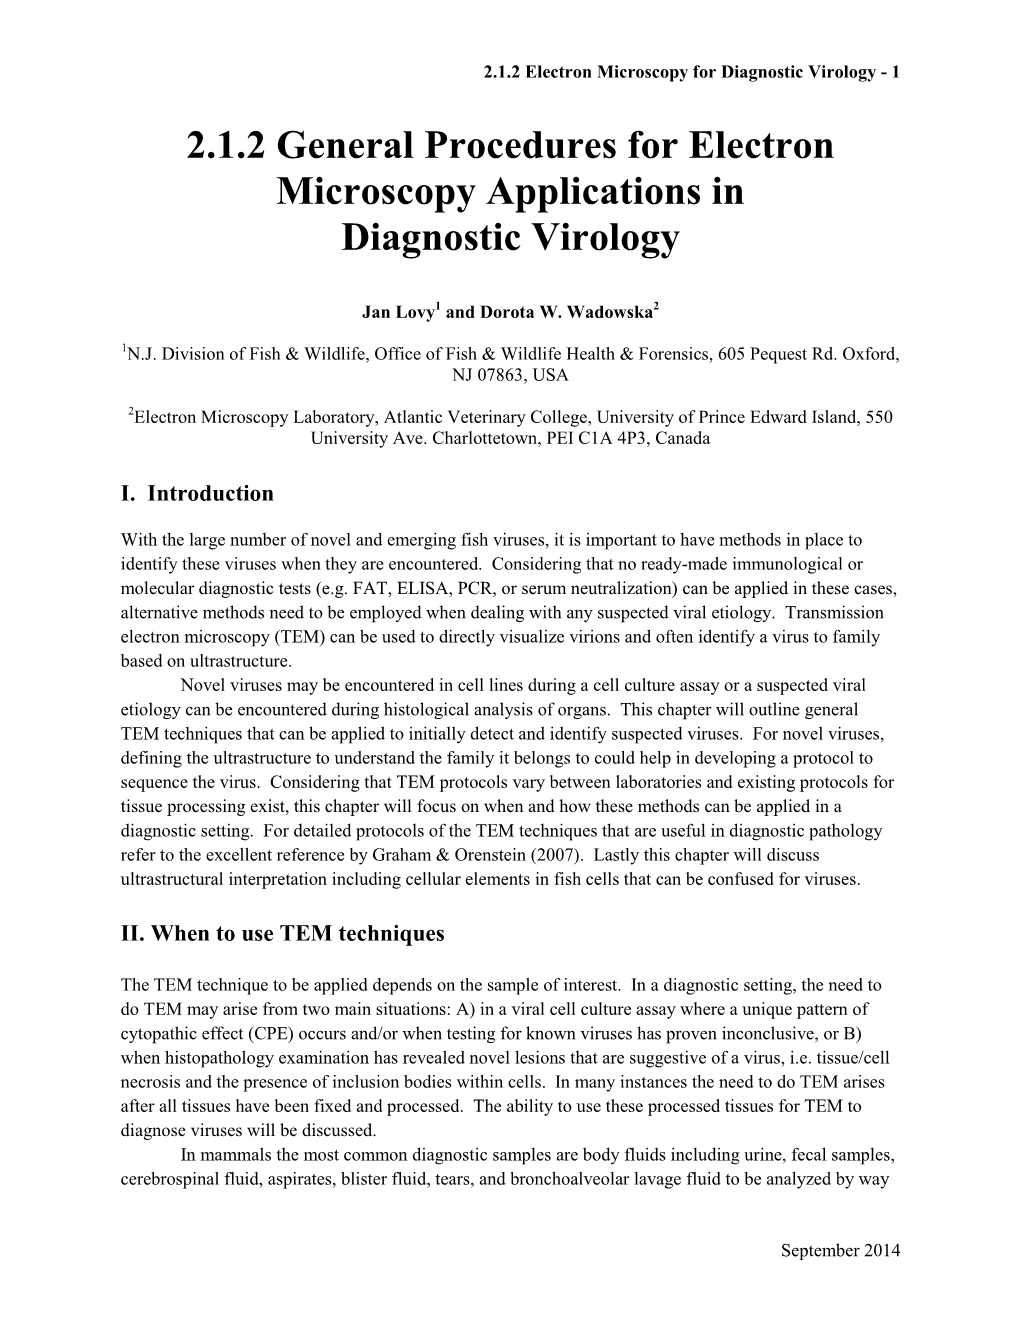 2.1.2 General Procedures for Electron Microscopy Applications in Diagnostic Virology